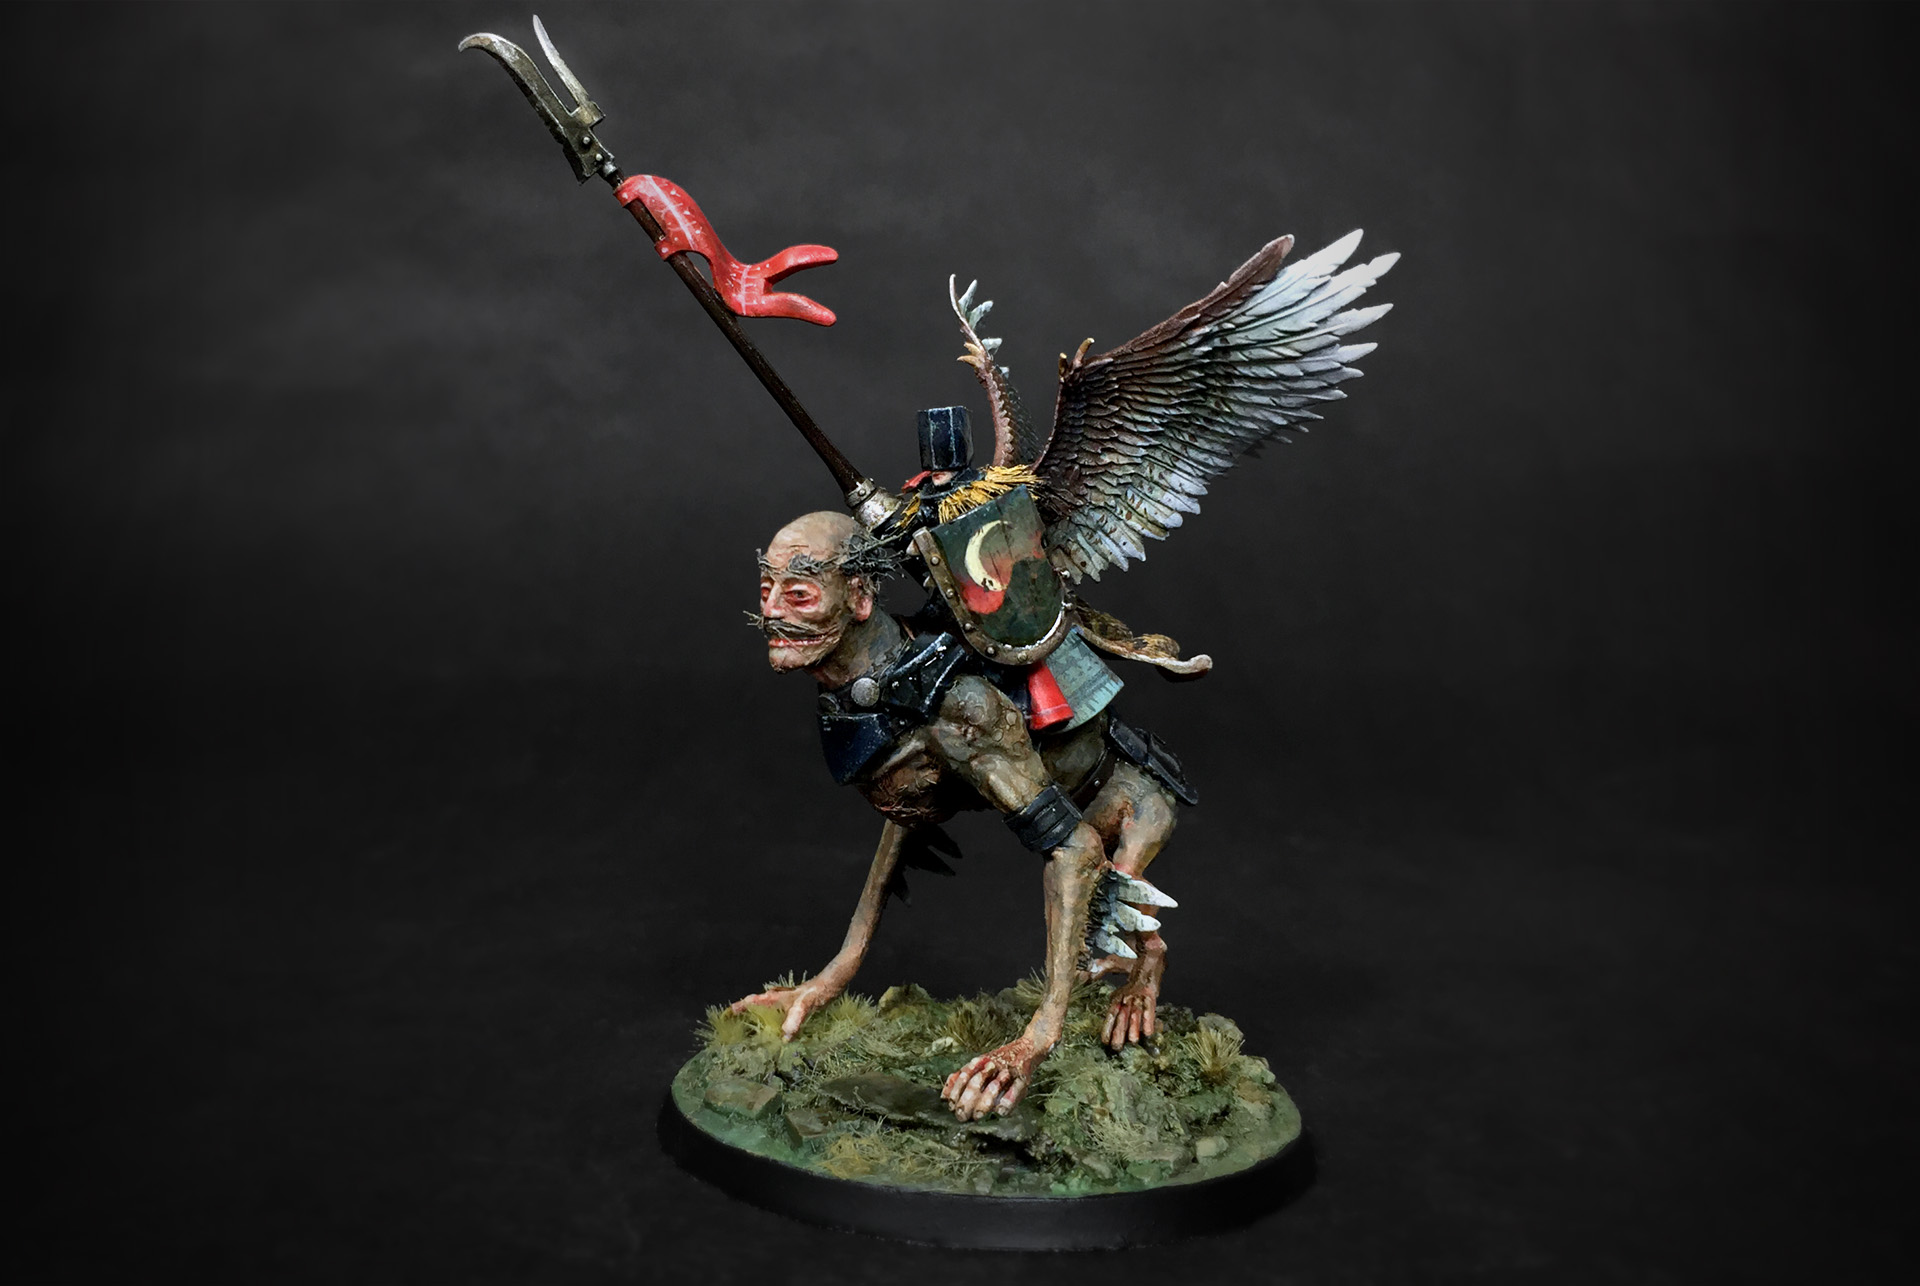 Sidelæns Mand Motherland Exalted Champion of the Mantigryph Dormant - Ex Profundis